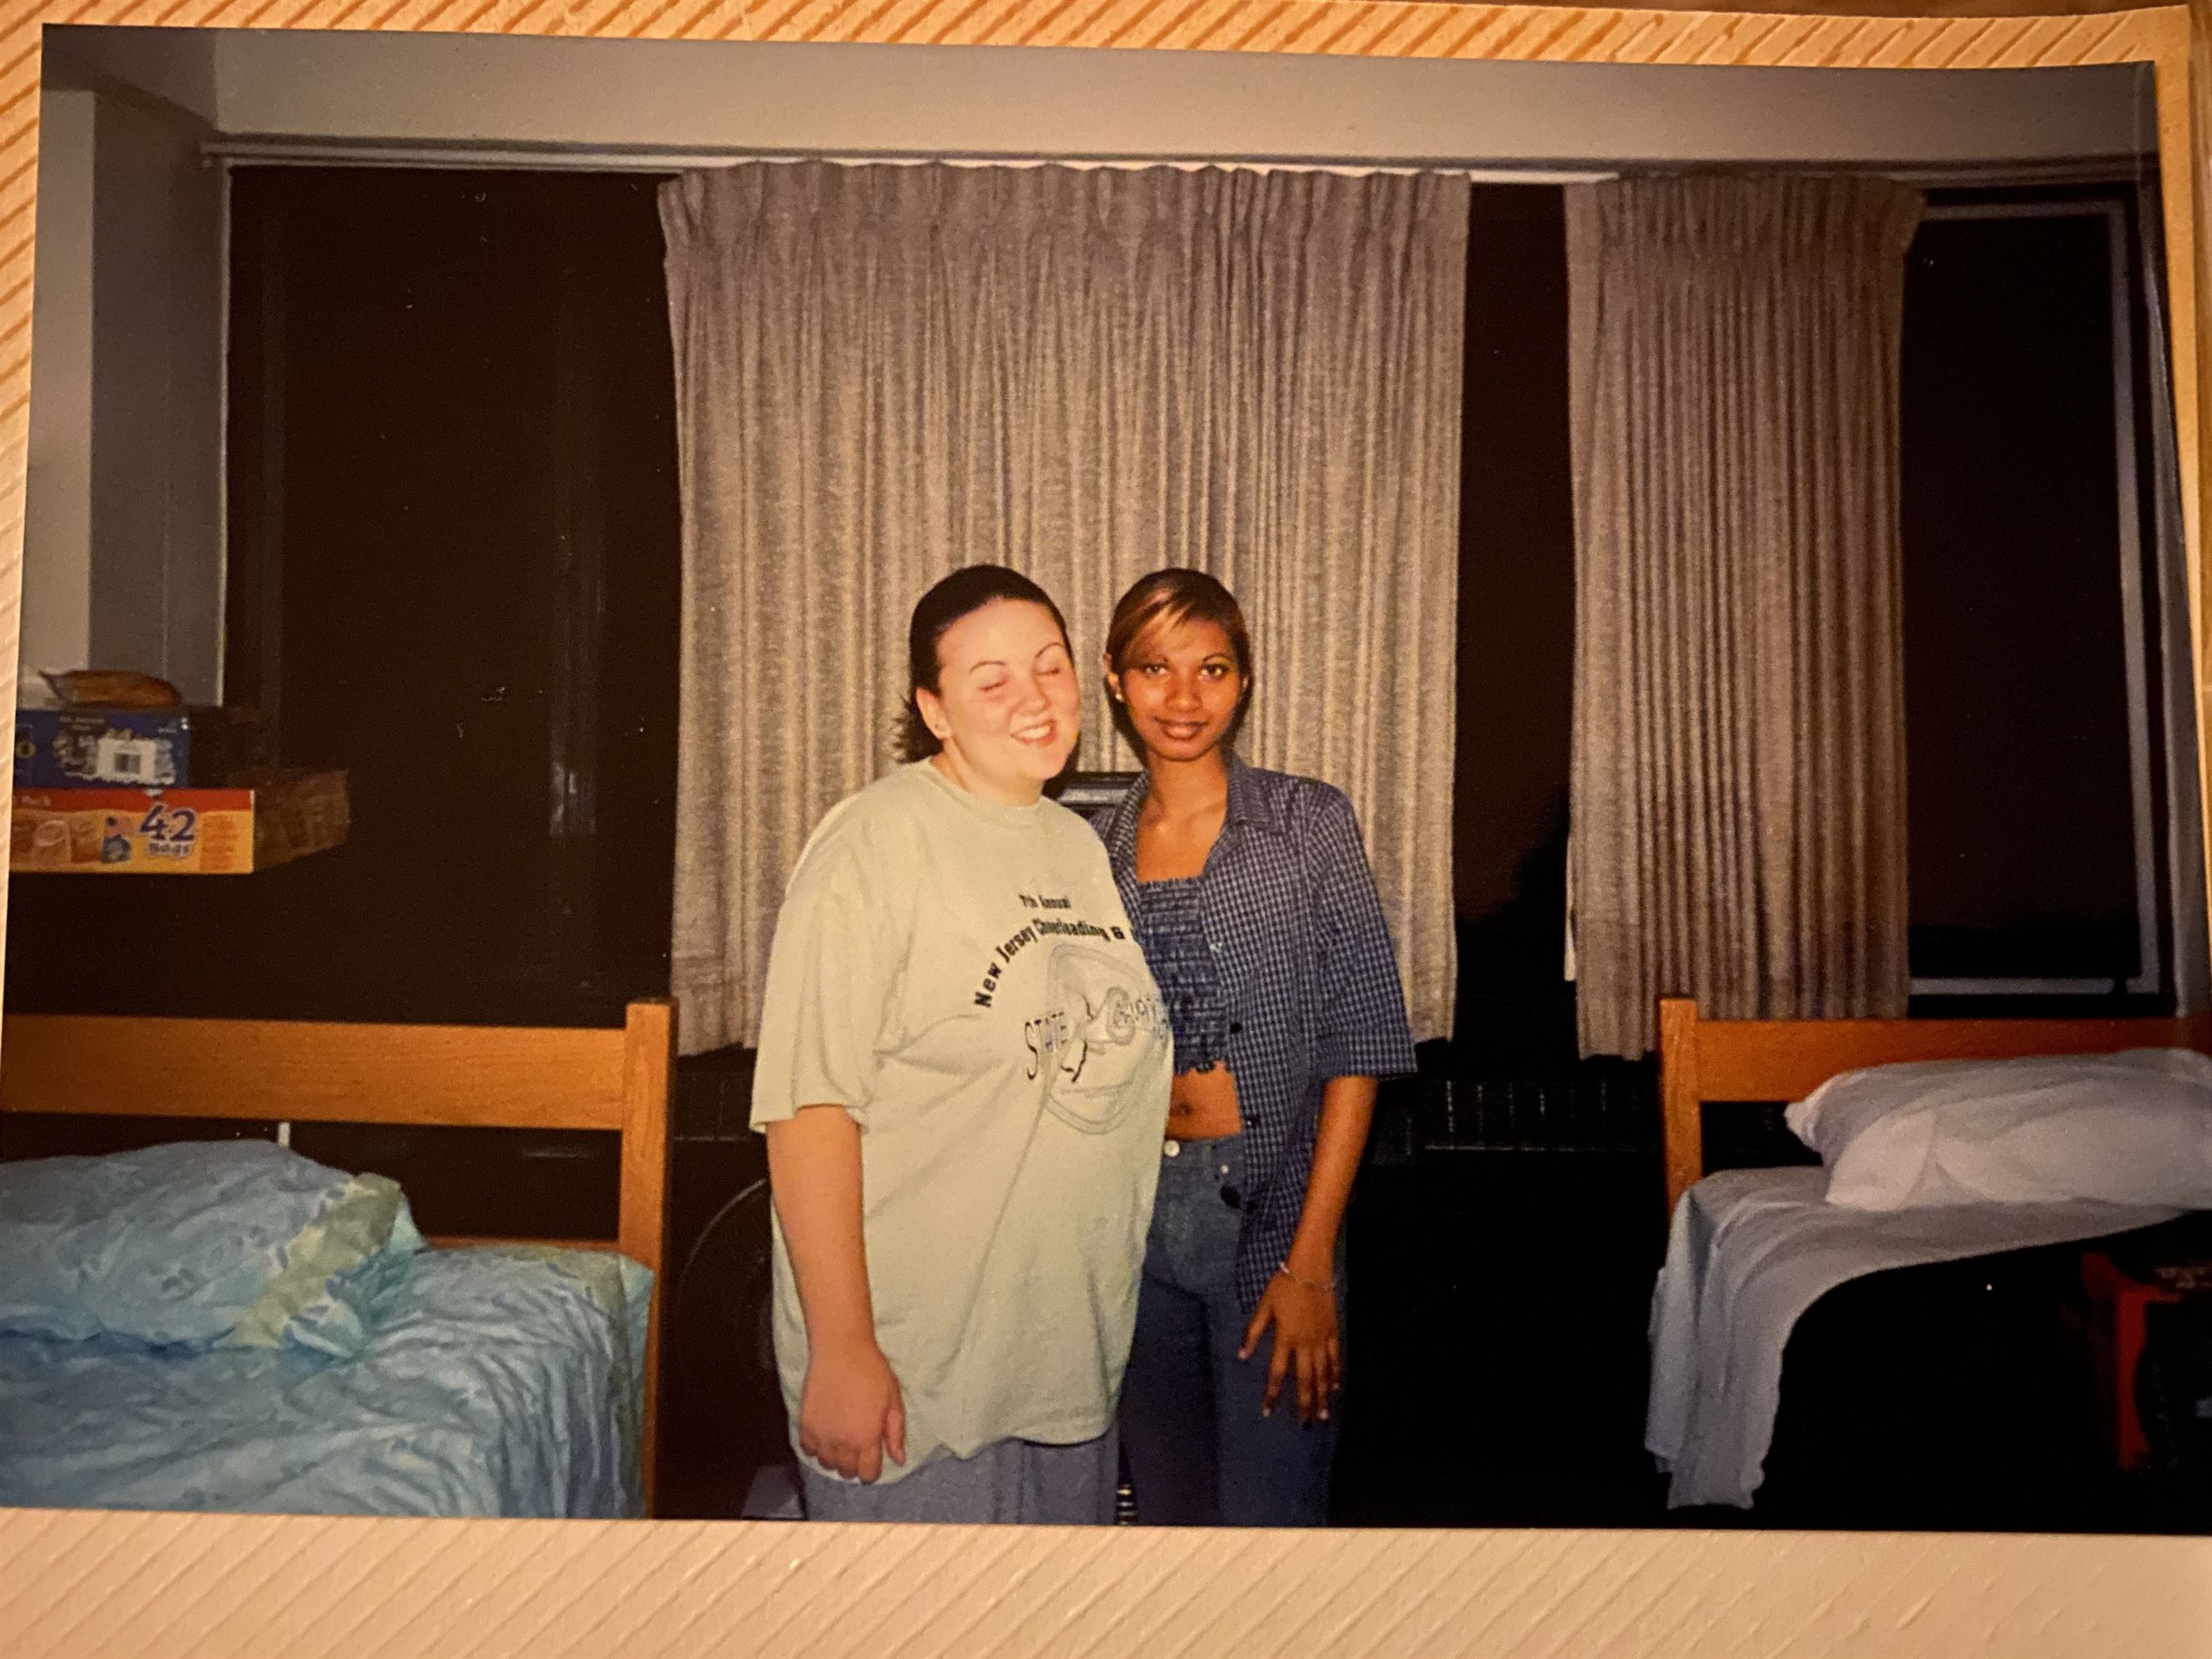 Stefanie Mulley (left) and her roommate when they moved into Bohn Hall 22 years ago. Photo courtesy of Diana Sisk-Gritz